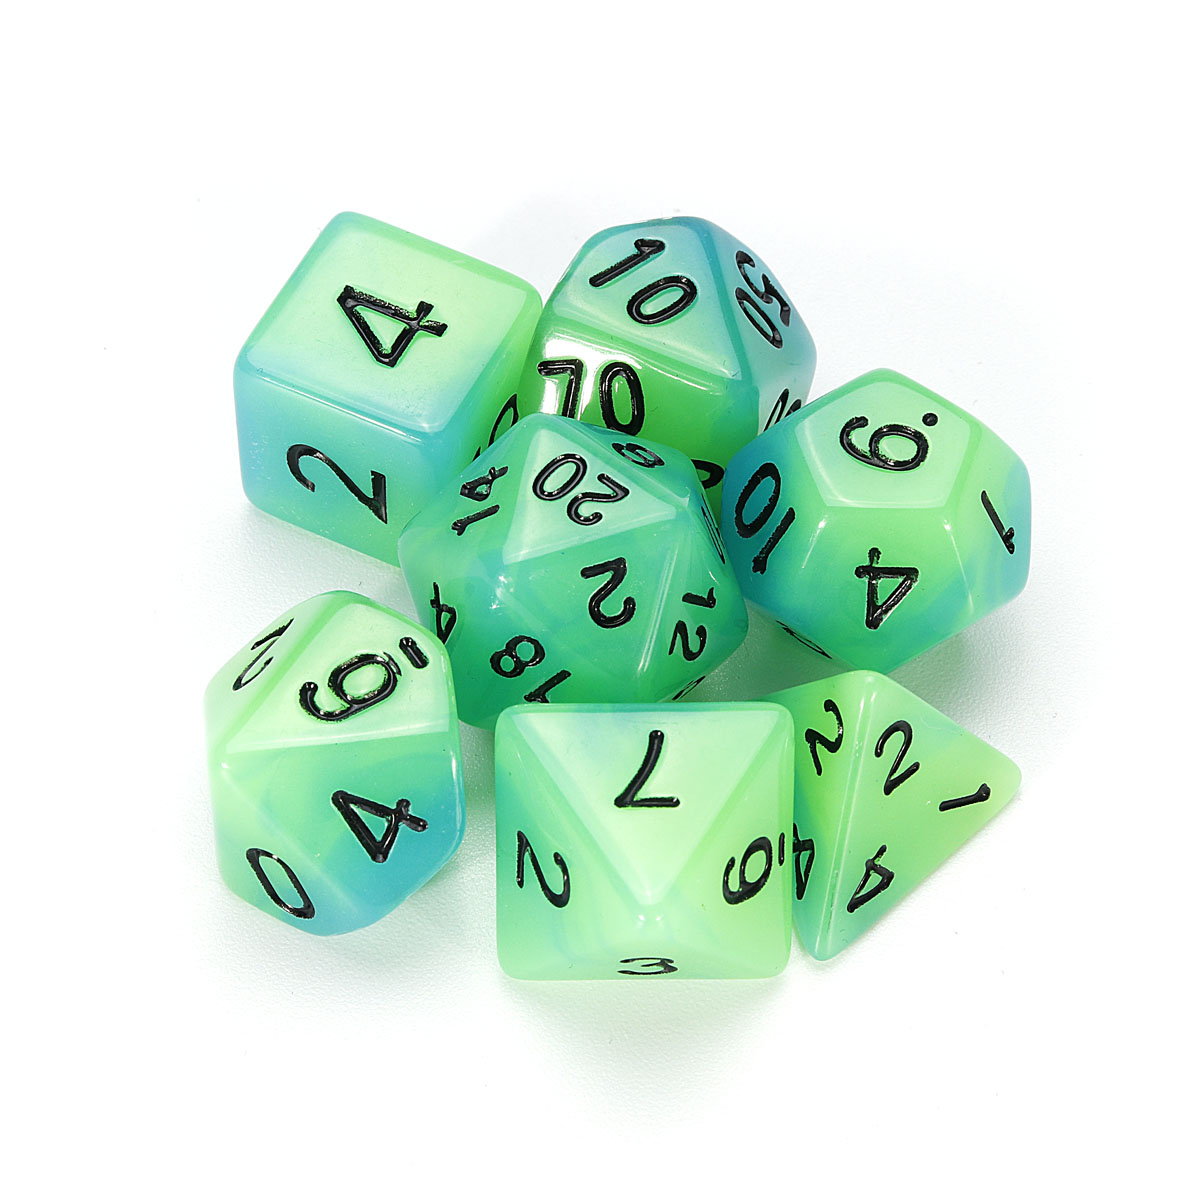 7-Pcs-Luminous-Polyhedral-Dices-Multisided-Dices-Dice-Set-With-Dice-Cup-For-RPG-1421428-7